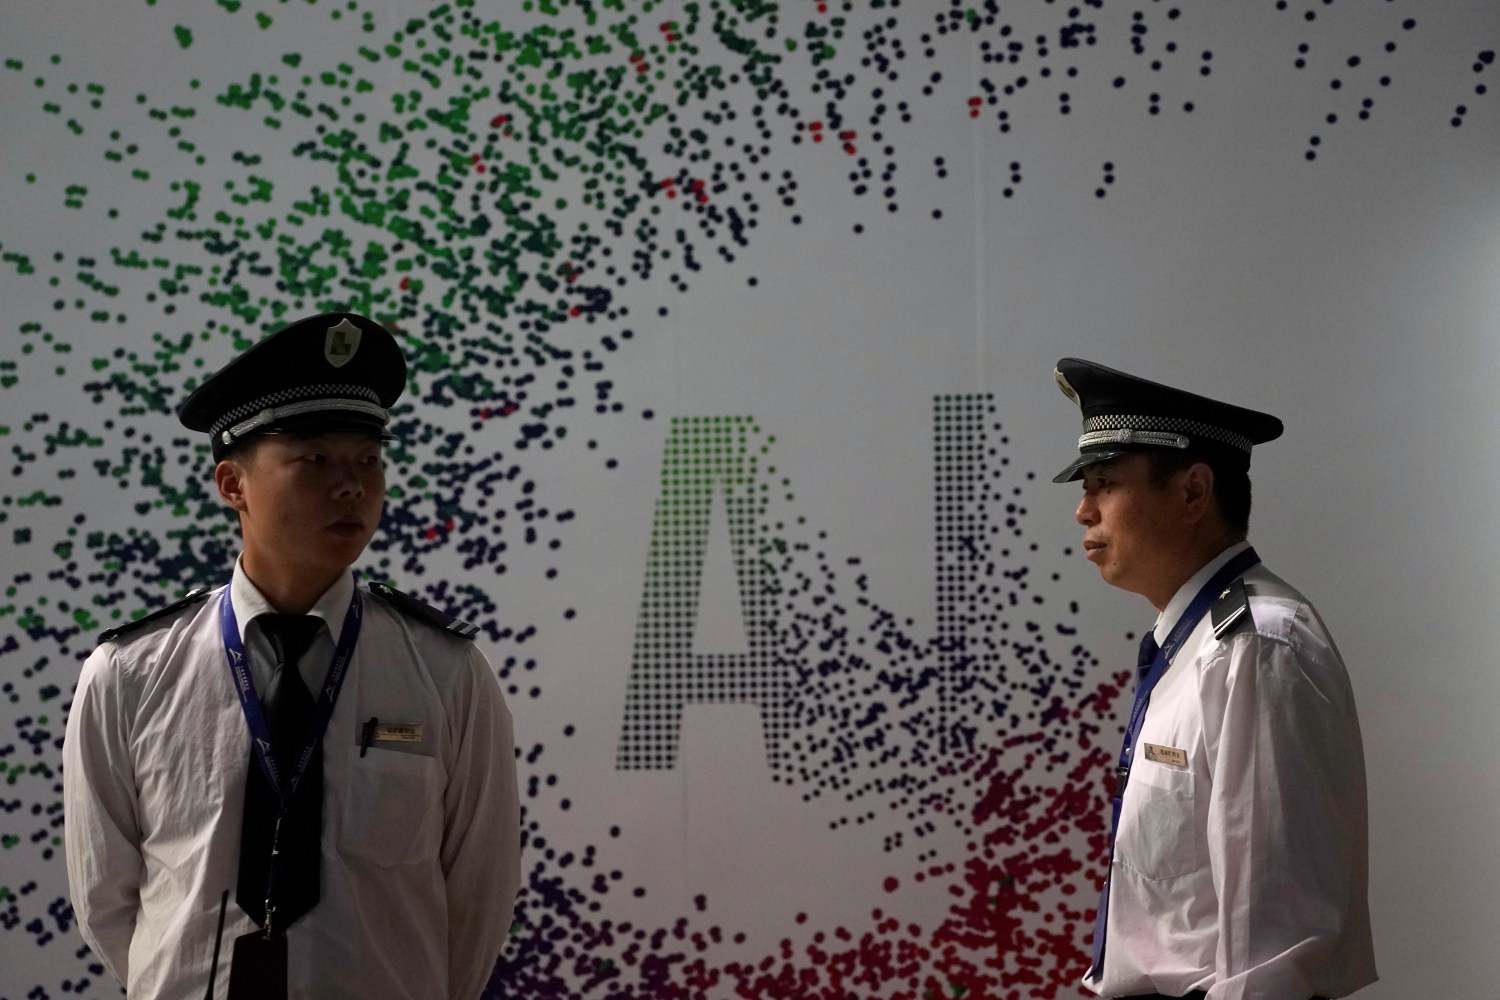 Security officers keep watch in front of an AI (Artificial Intelligence) sign at the annual Huawei Connect event in Shanghai, China September 18, 2019. REUTERS/Aly Song - RC1ADFE7A400